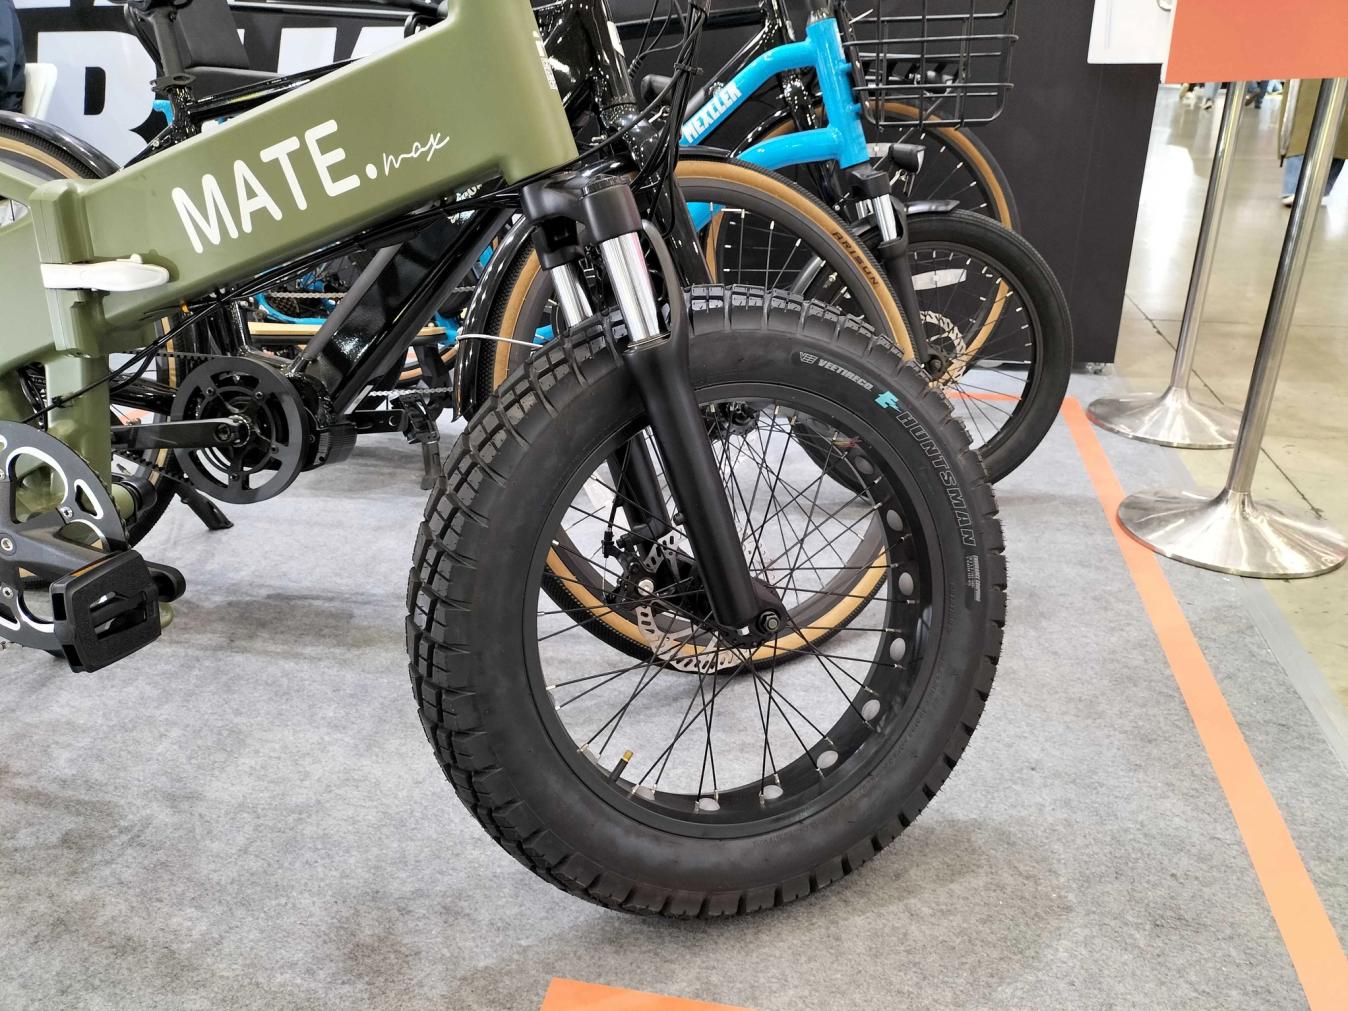 The MATE is built for off-road terrain with four-inch tyres